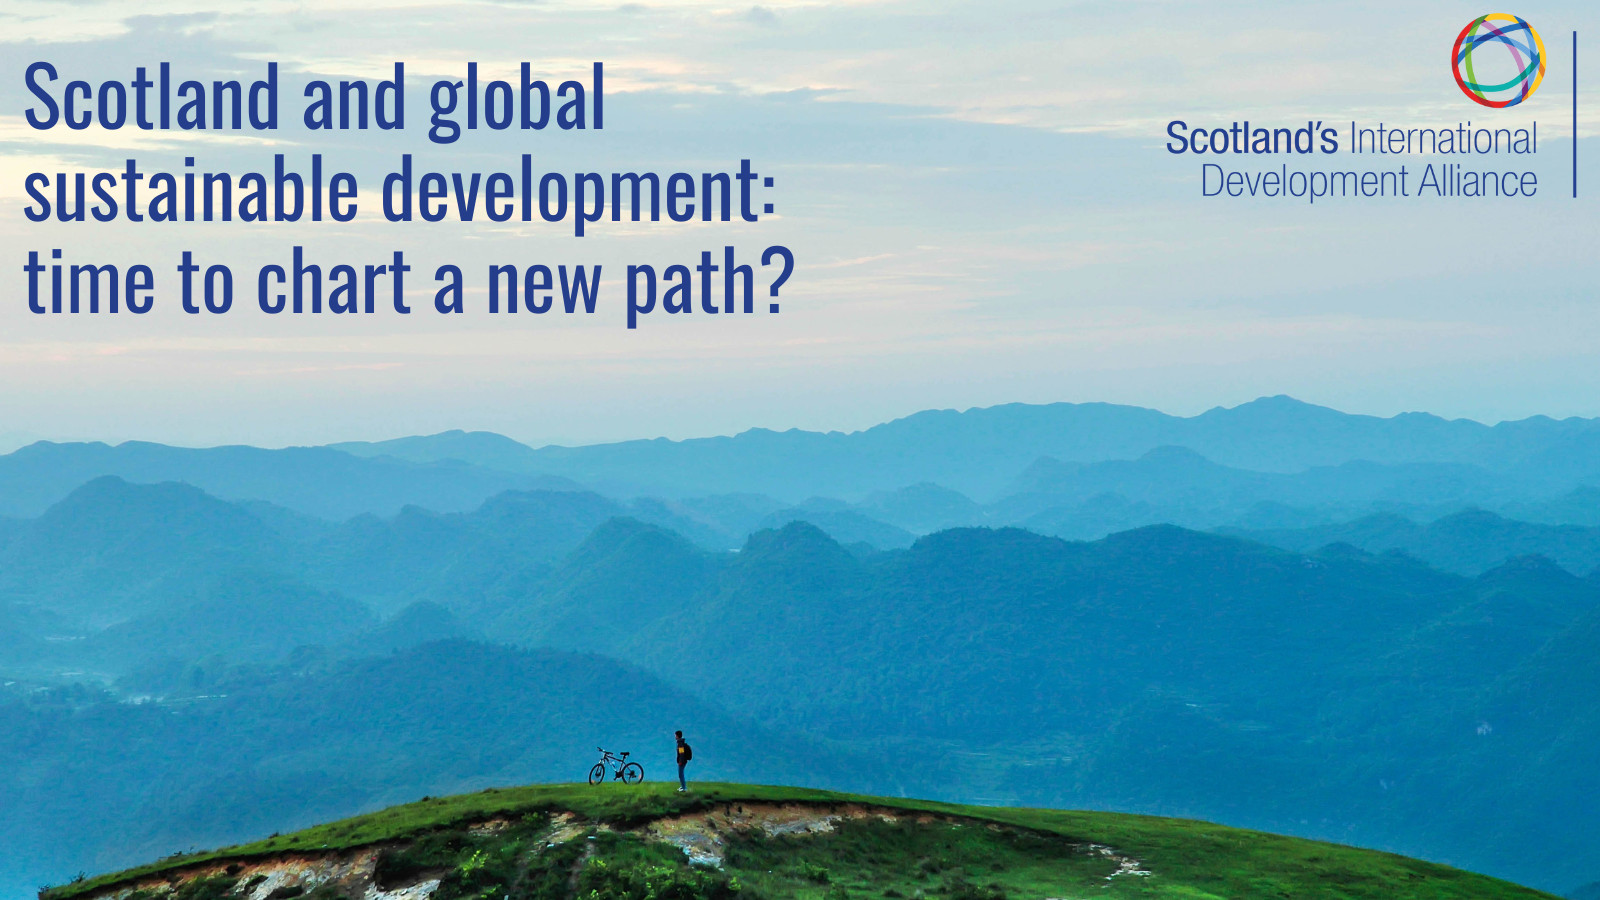 Scotland & global sustainable development: time to chart a new path?